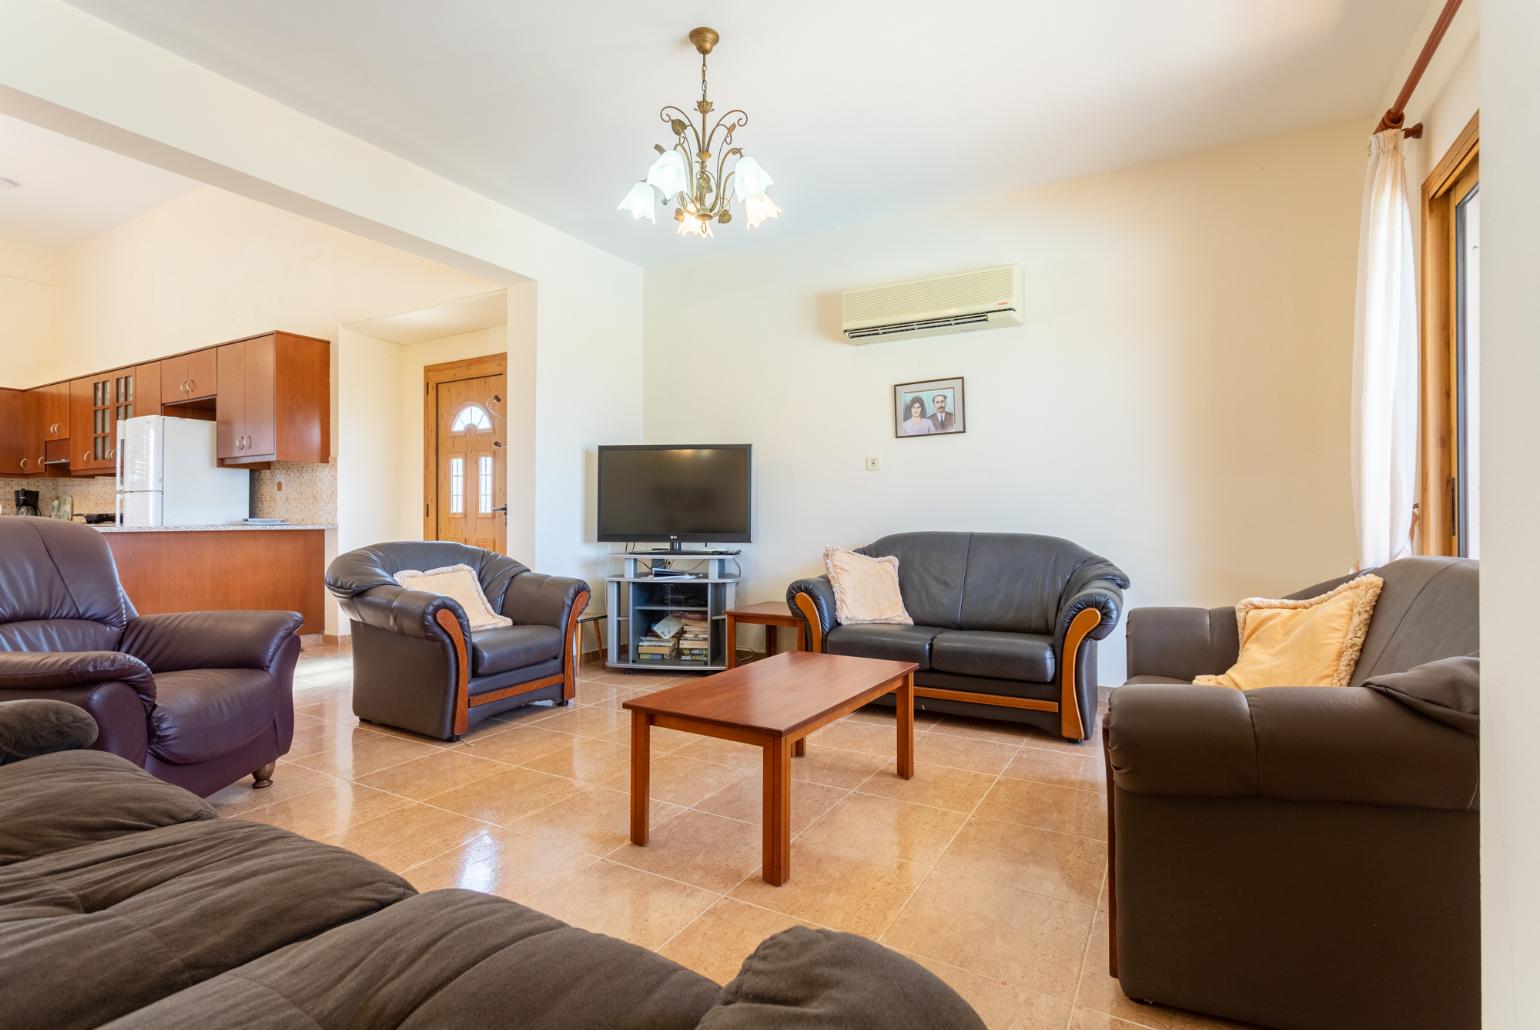 Open-plan living room with sofas, dining areas, kitchen, A/C, WiFi internet, satellite TV, and terrace access